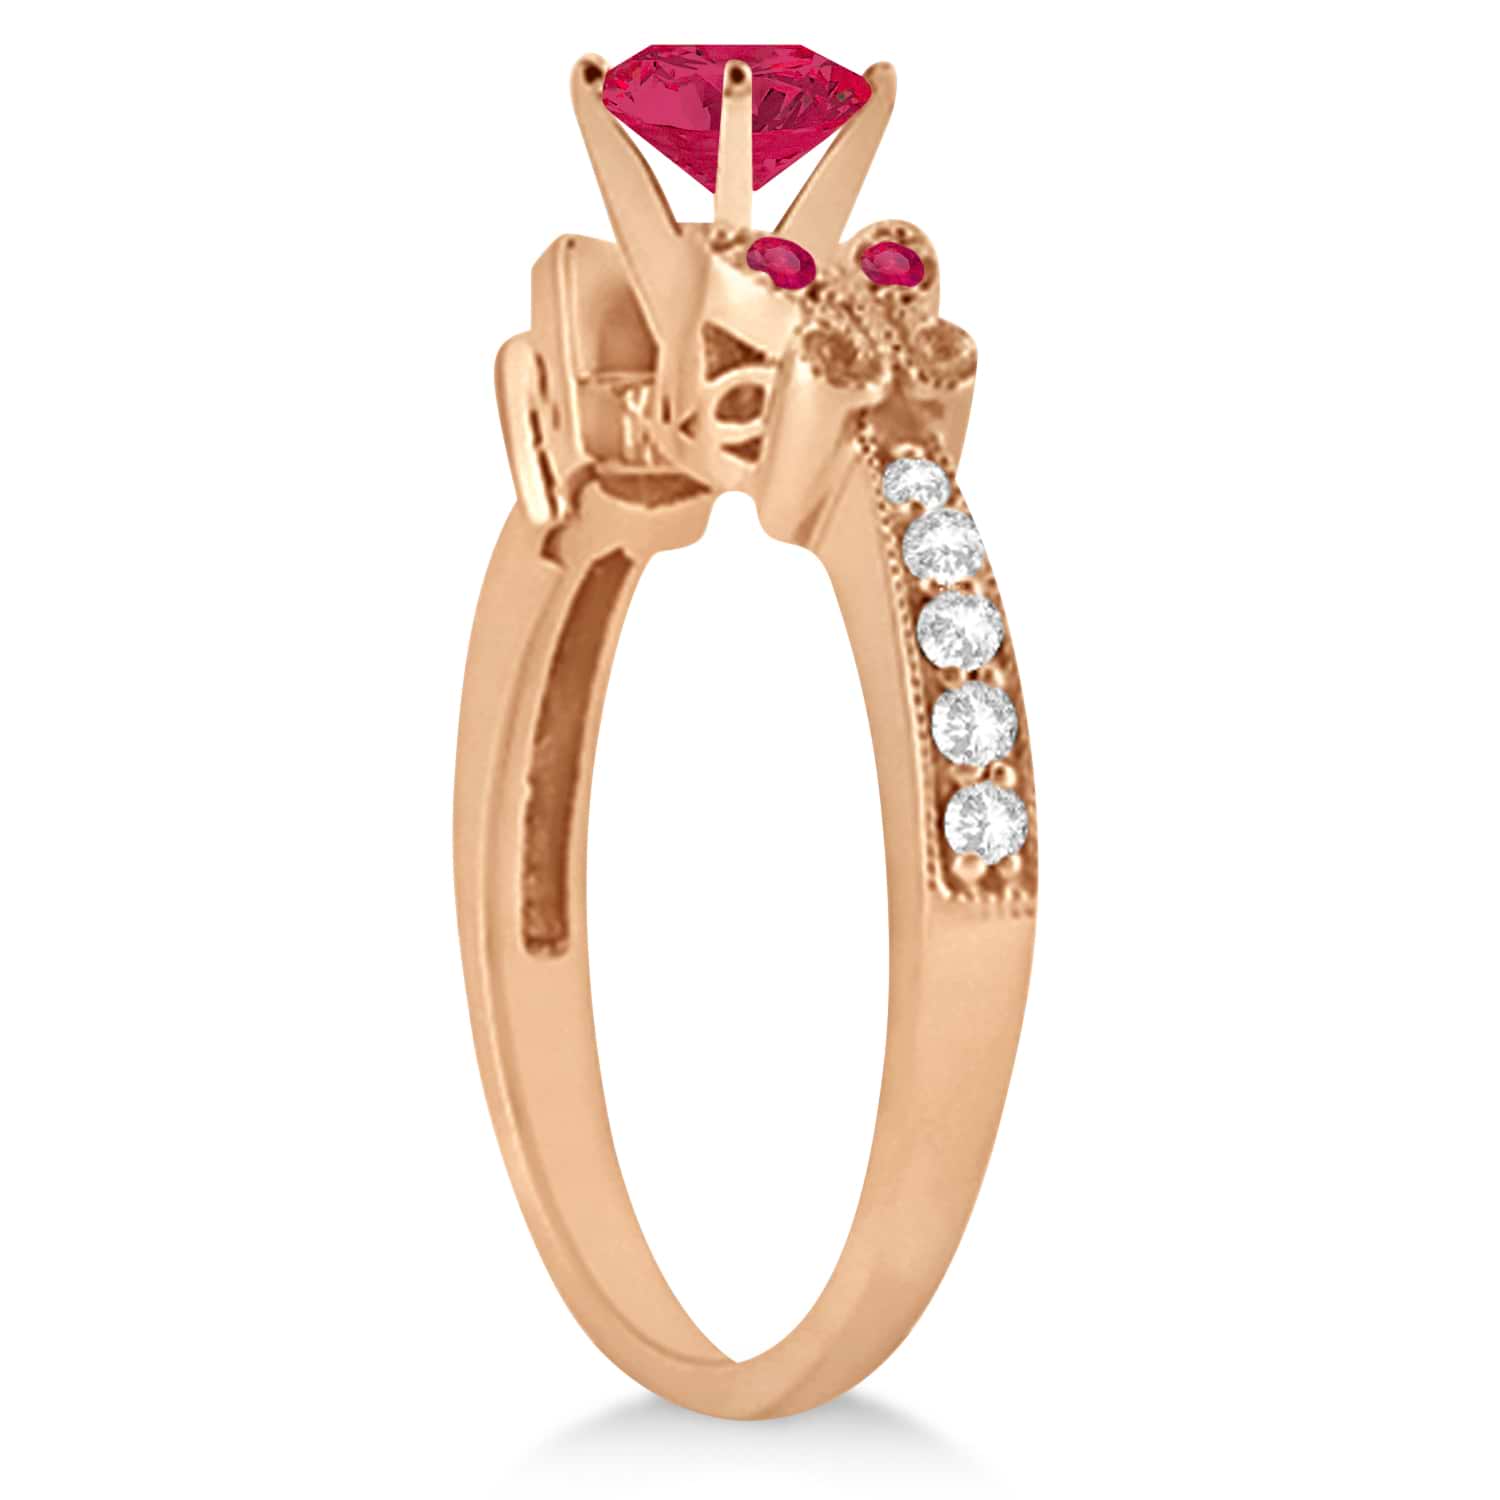 Butterfly Genuine Ruby & Diamond Engagement Ring 18K Rose Gold 0.86ct